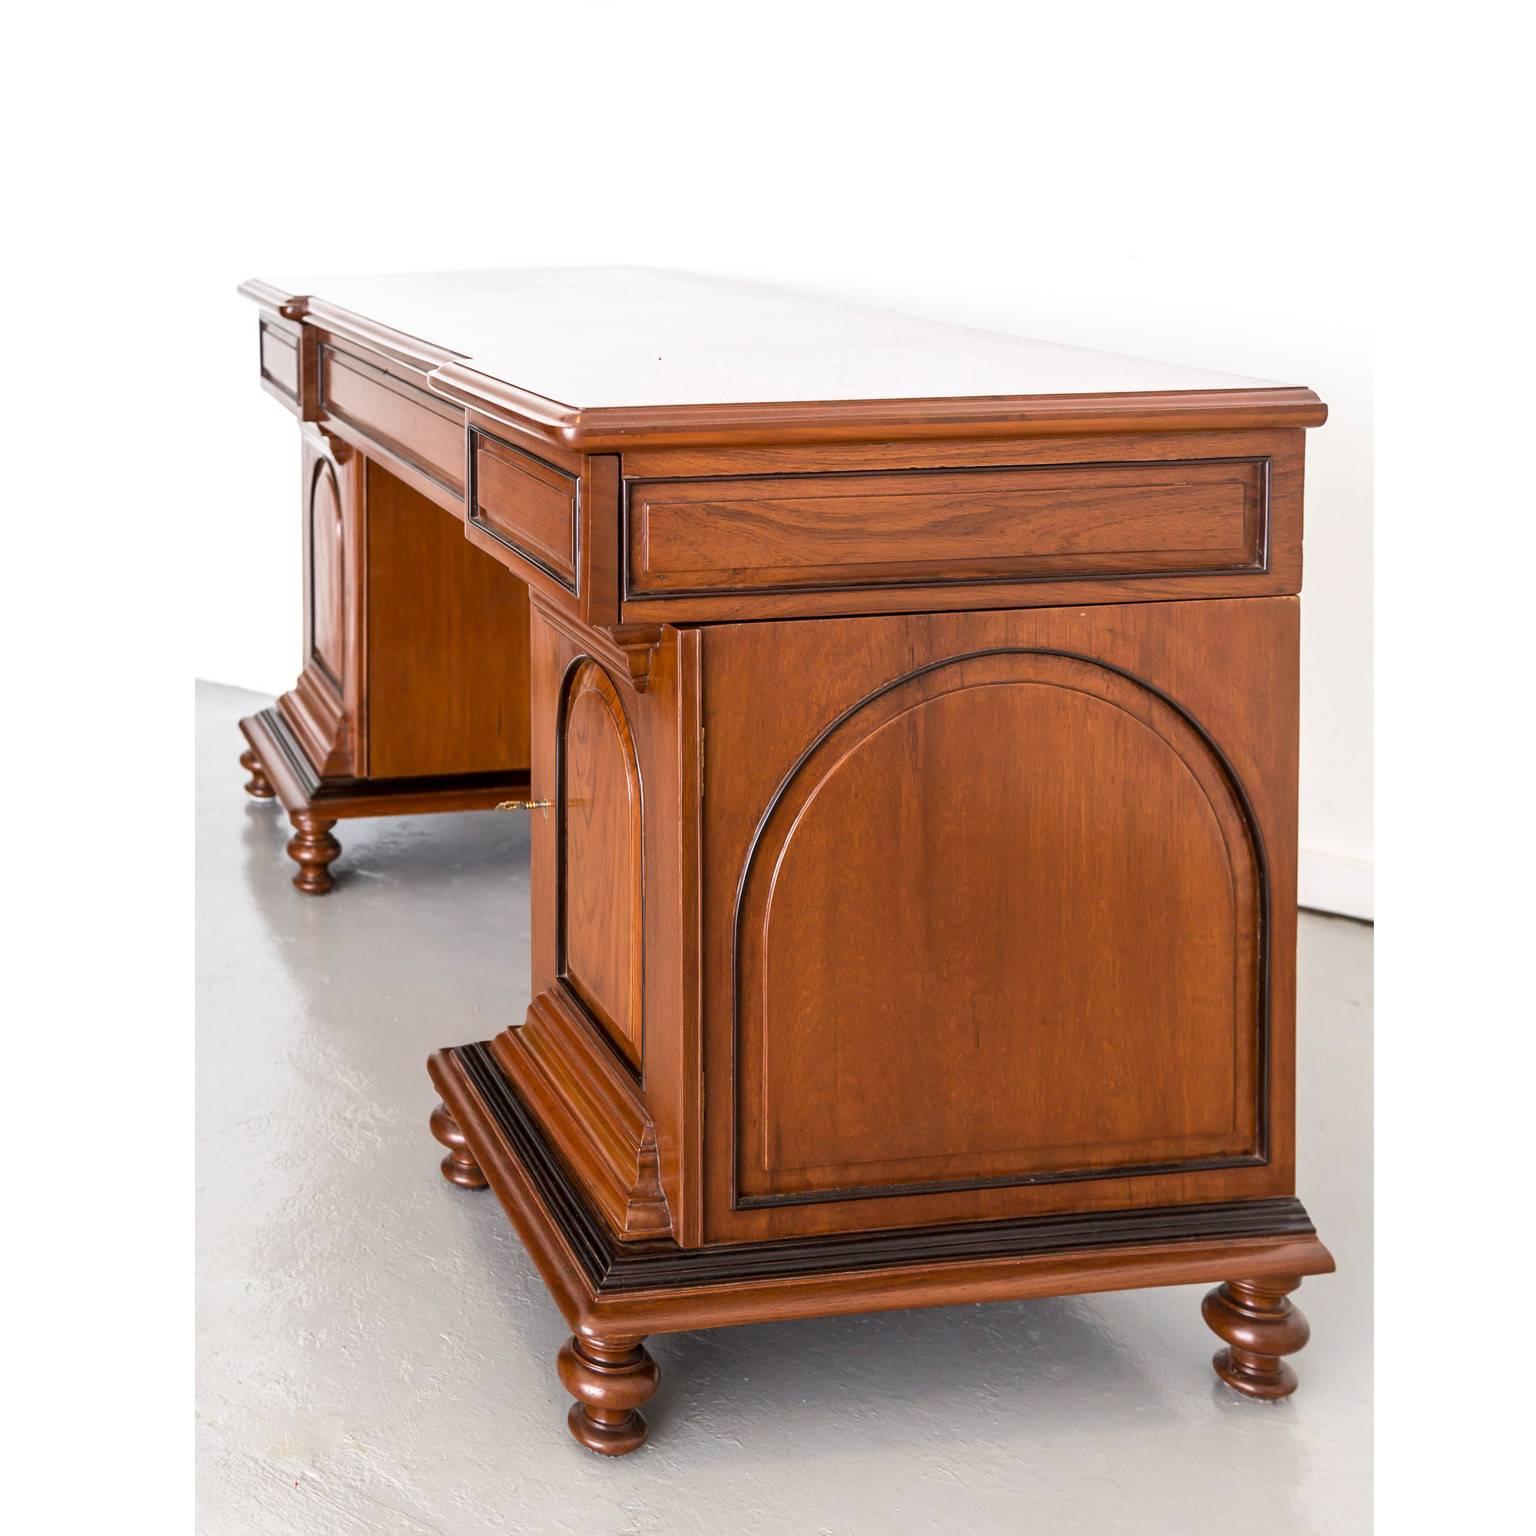 A British Colonial pedestal desk in teak wood with nicely contrasting rosewood details. 
The deep frieze features an inverted centre section with a large drawer flanked by two smaller ones. Both pedestals have a paneled door that opens to reveal